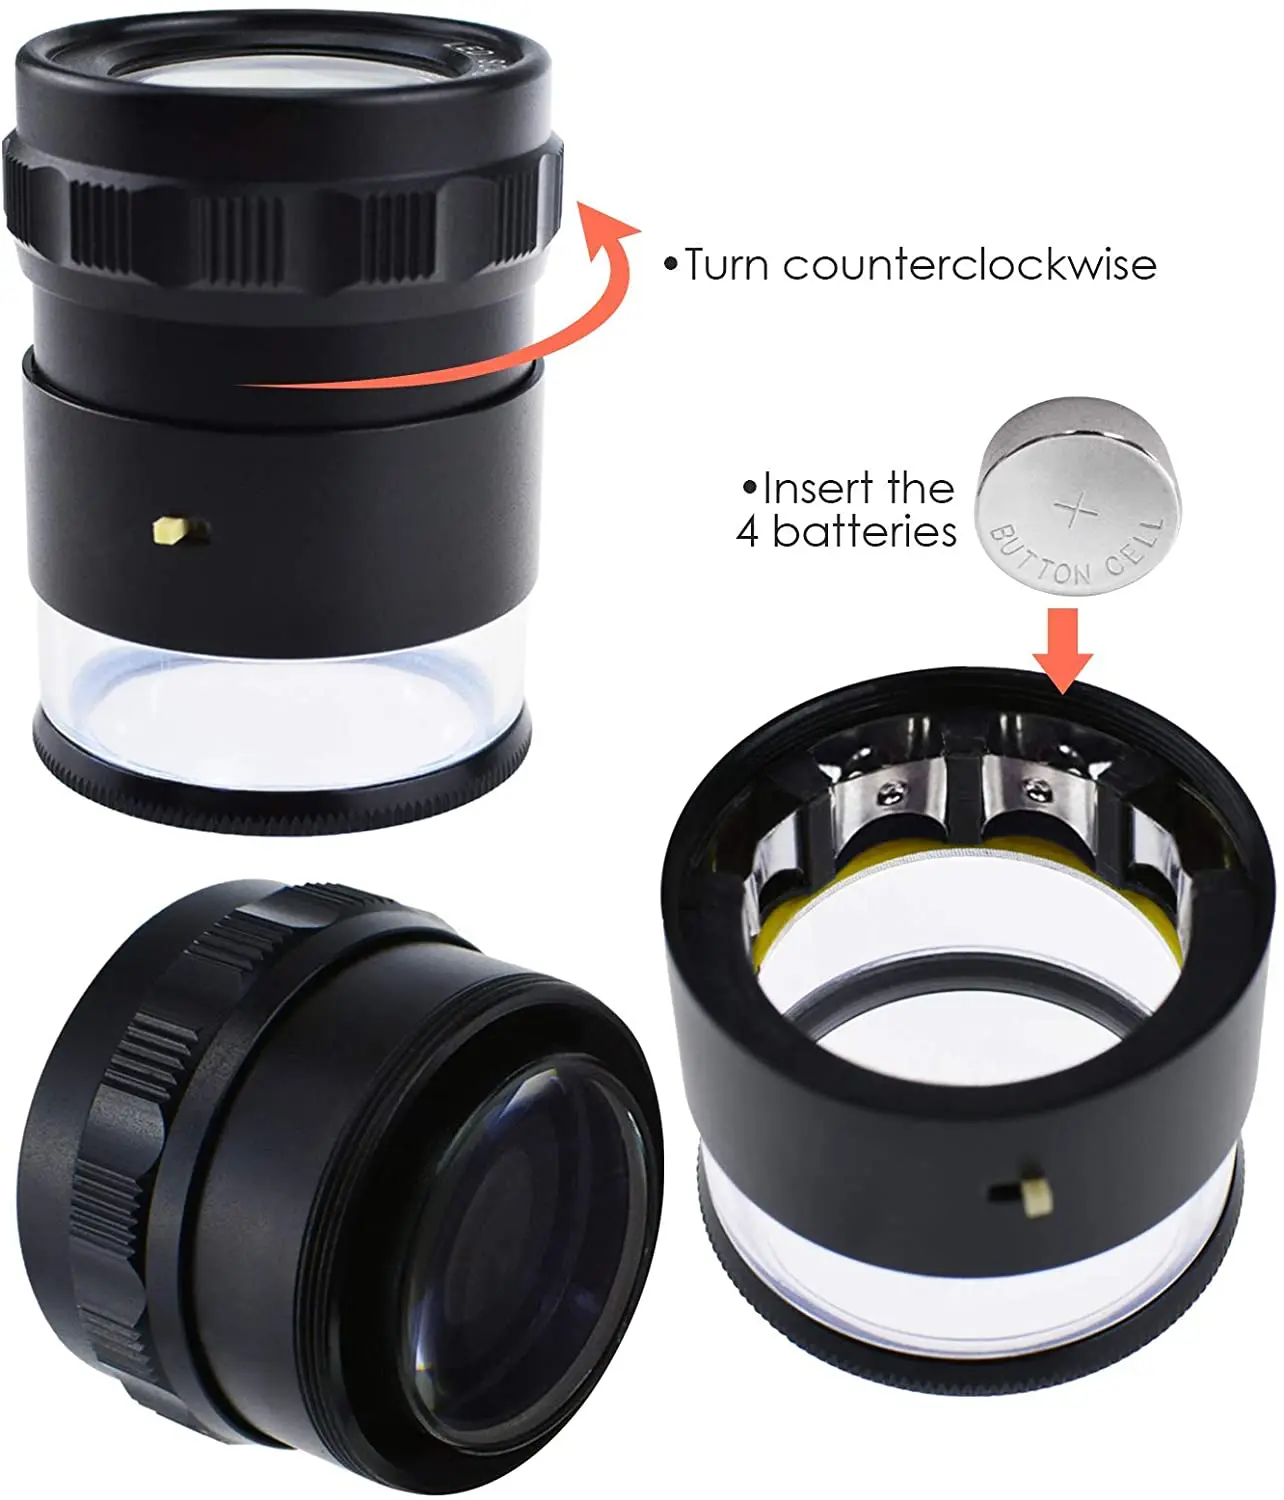 10x with 25mm Field of View Loupe Interchangeable Reticle Scale for Jewelry & Hobby Tool Magnifier,measuring magnifier